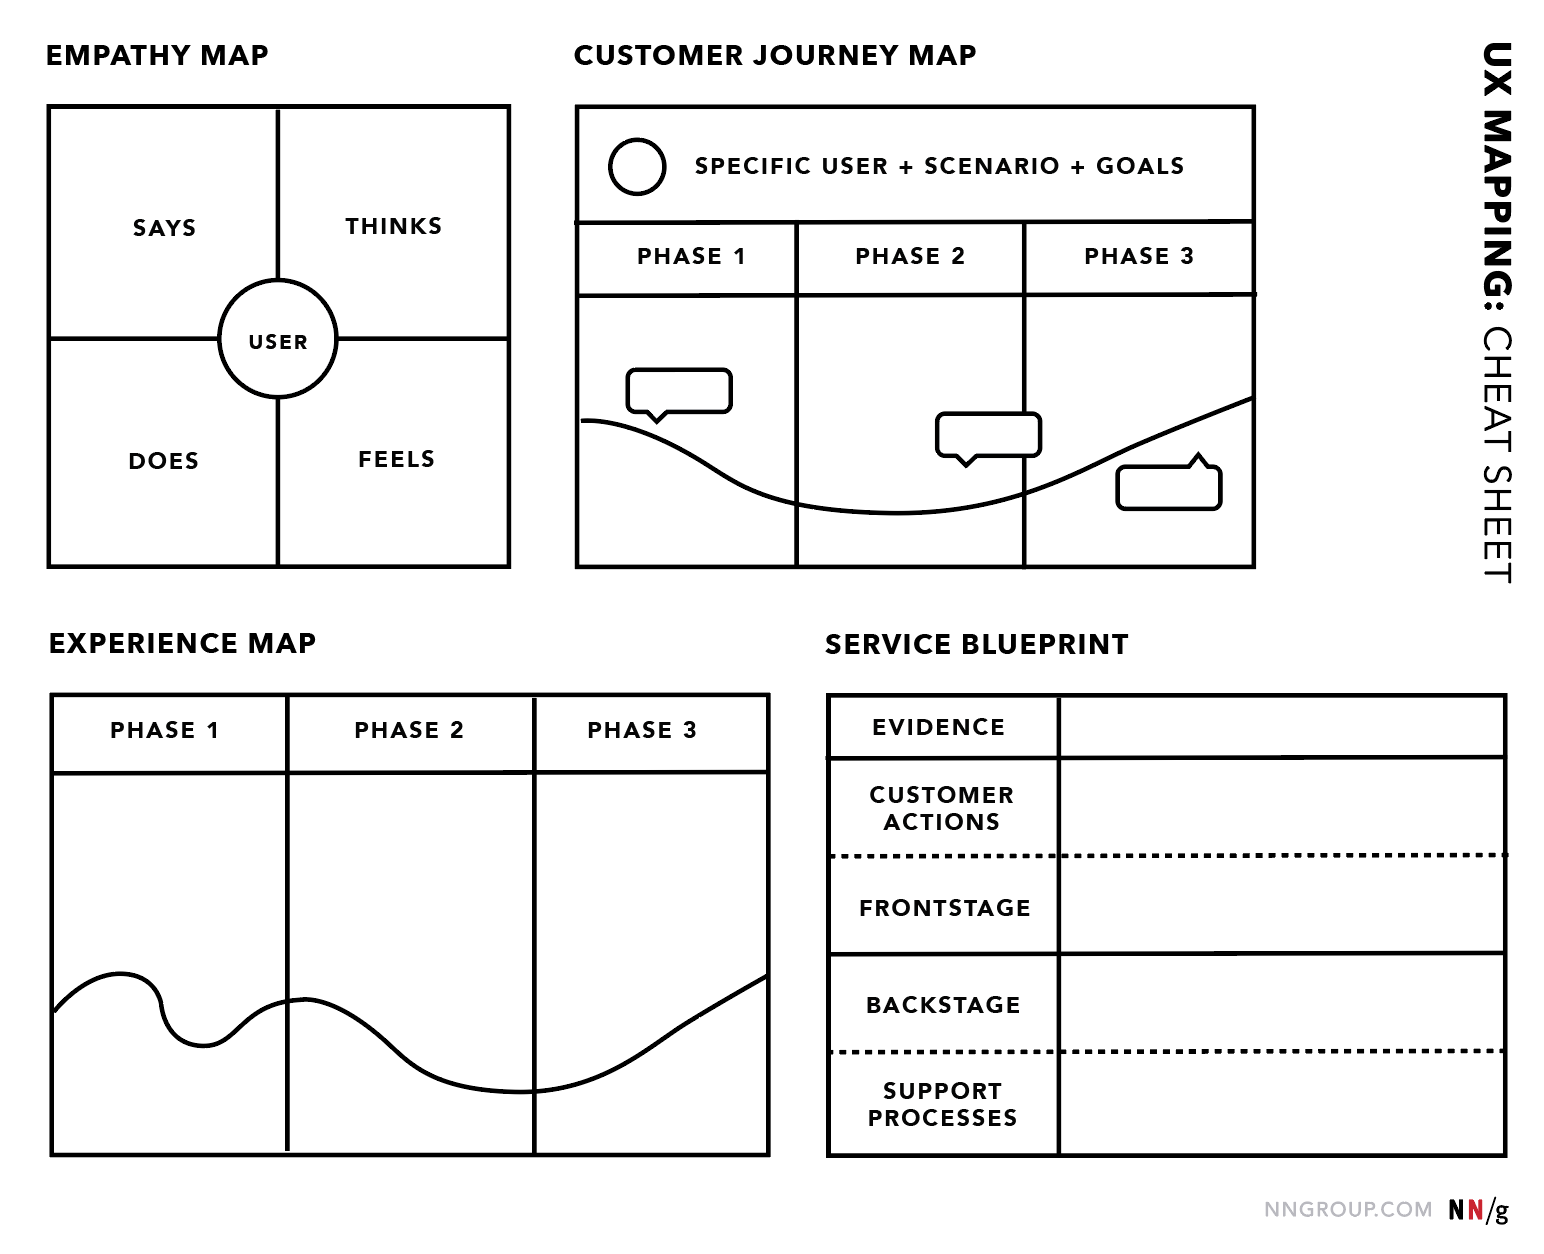 UX Mapping Cheat Sheet: Empathy Mapping, Customer Journey Mapping, Experience Mapping and Service Blueprinting